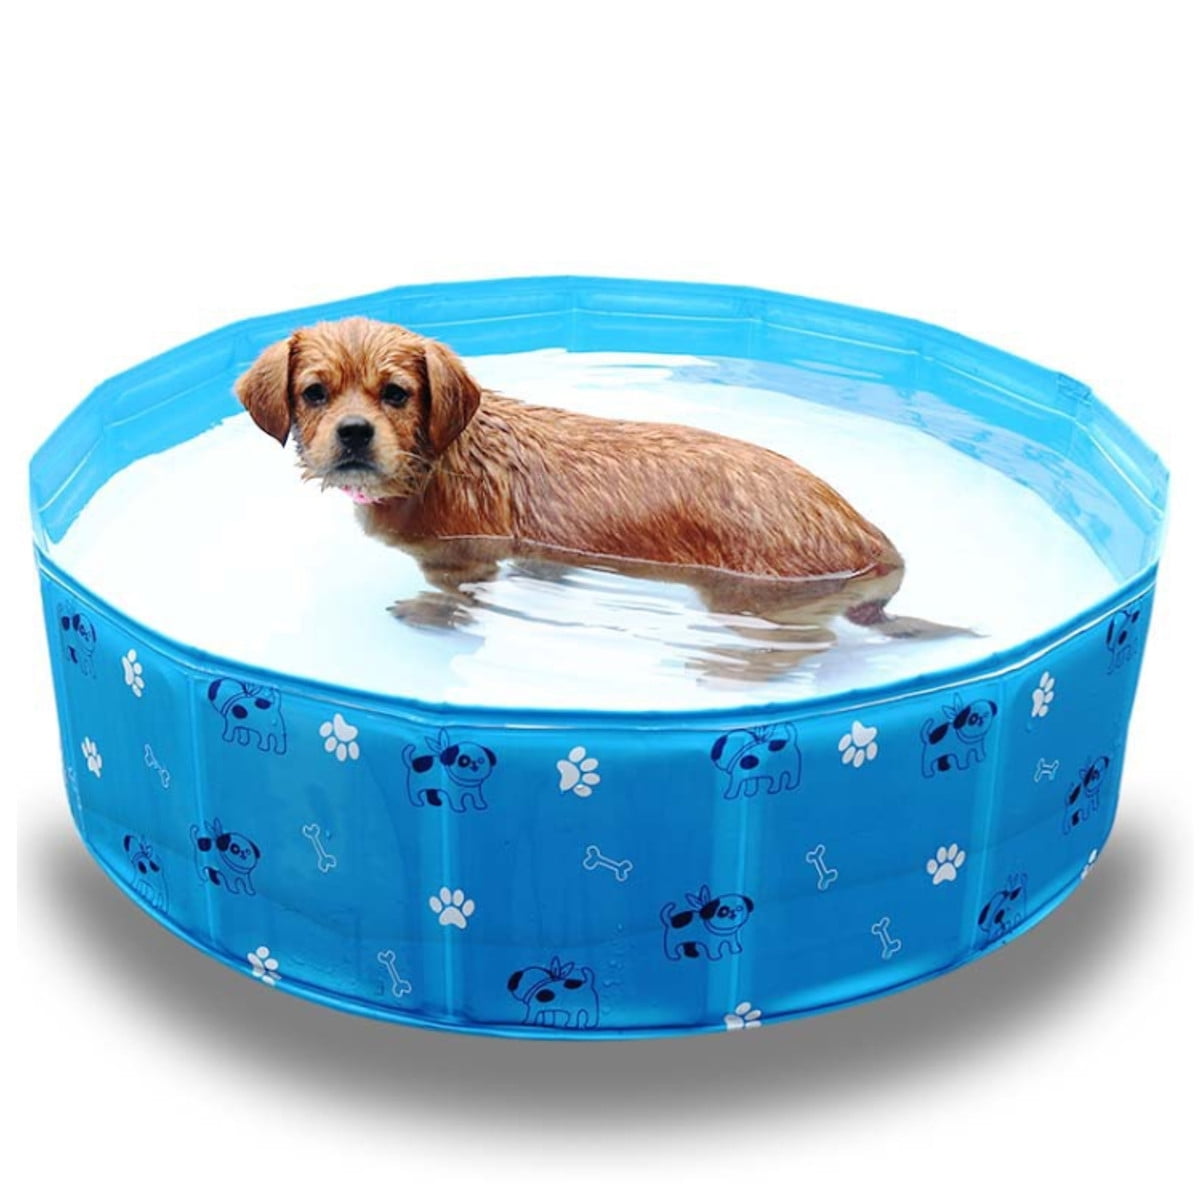 Portable Pet Dog Pool, Collapsible Bathing Tub, Indoor & Outdoor